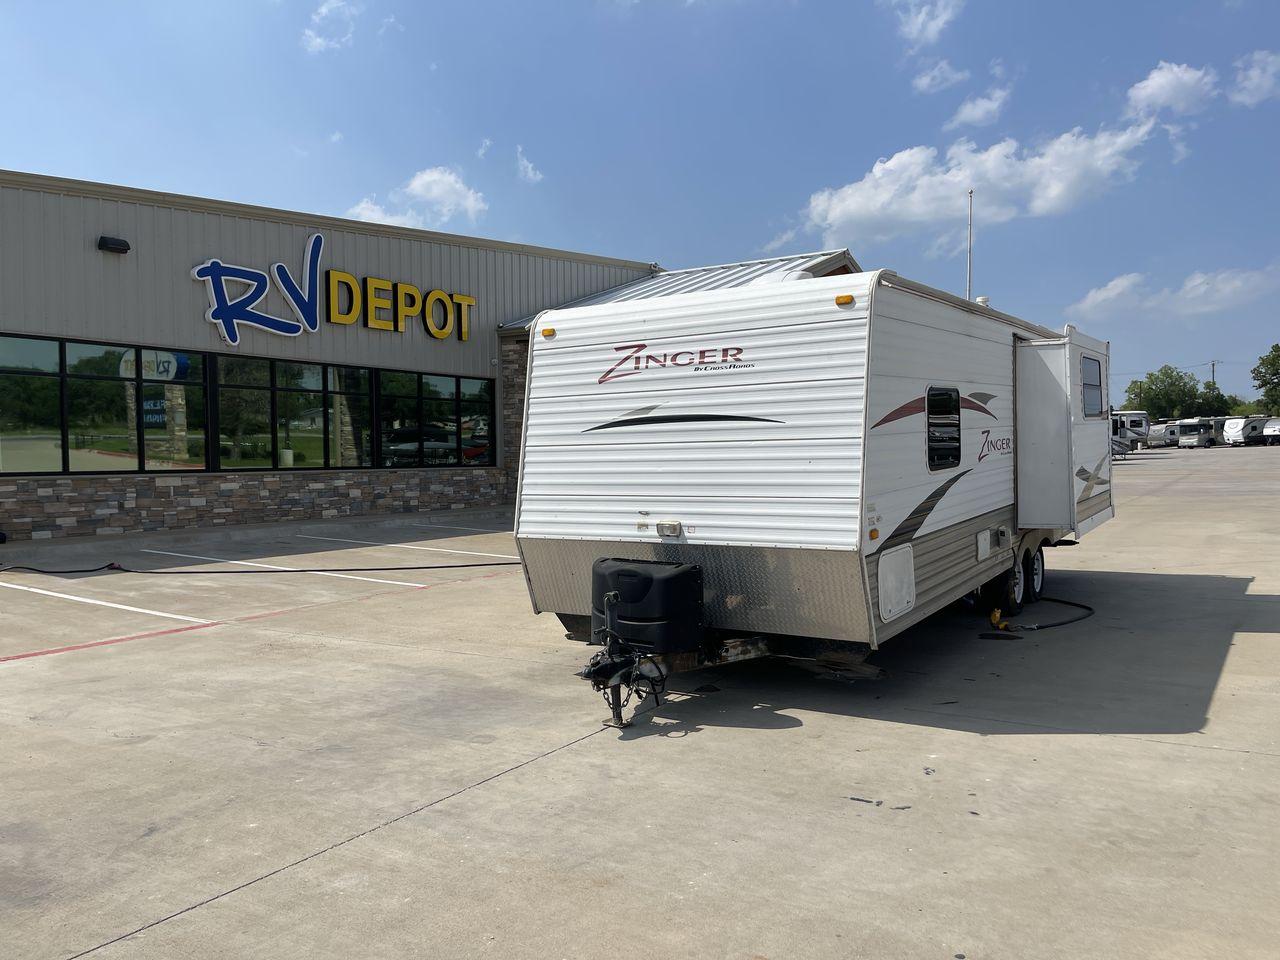 2010 WHITE CROSSROADS ZINGER (4V0TC252XAA) , Length: 26 ft | Dry Weight: 4,519 lbs | Gross Weight: 7,580 lbs | Slides: 1 transmission, located at 4319 N Main Street, Cleburne, TX, 76033, (817) 221-0660, 32.435829, -97.384178 - With the 2010 CrossRoads RV Zinger ZT250RK, you may have the perfect balance of comfort and convenience. The dry weight of this 26-foot travel trailer is 4,519 pounds, while the gross weight is 7,580. This makes it easy to tow without sacrificing space or comfort. This RV has a single slide-out and - Photo #0